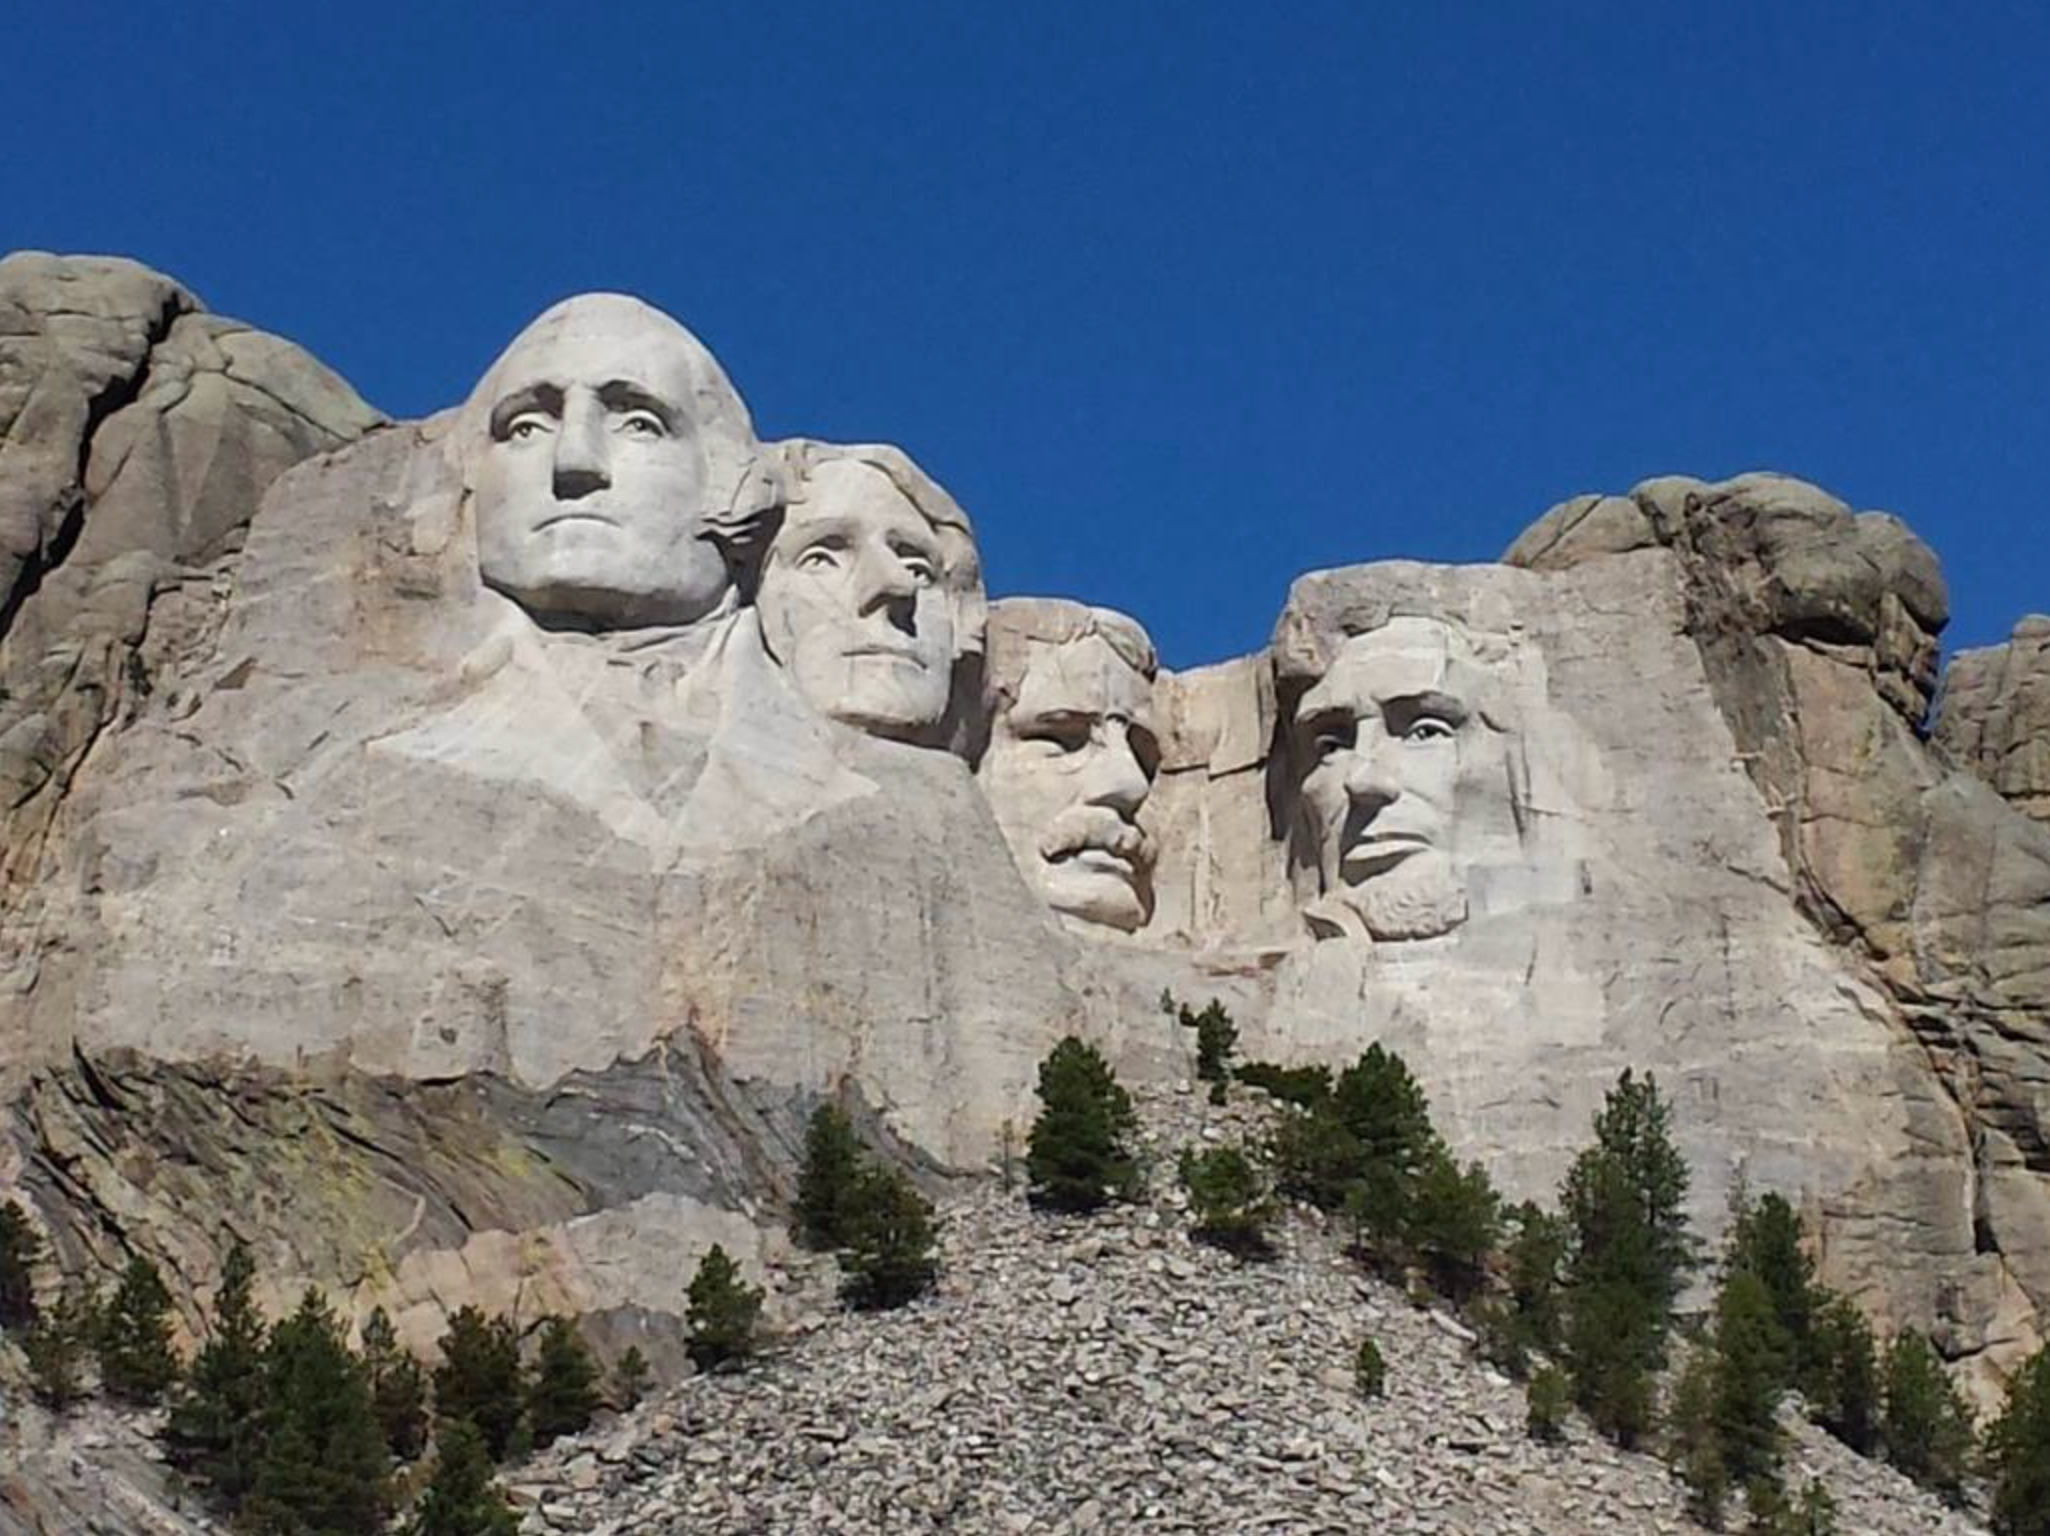 Mount Rushmore September 2013. (Photo by Clint Henderson/The Points Guy)